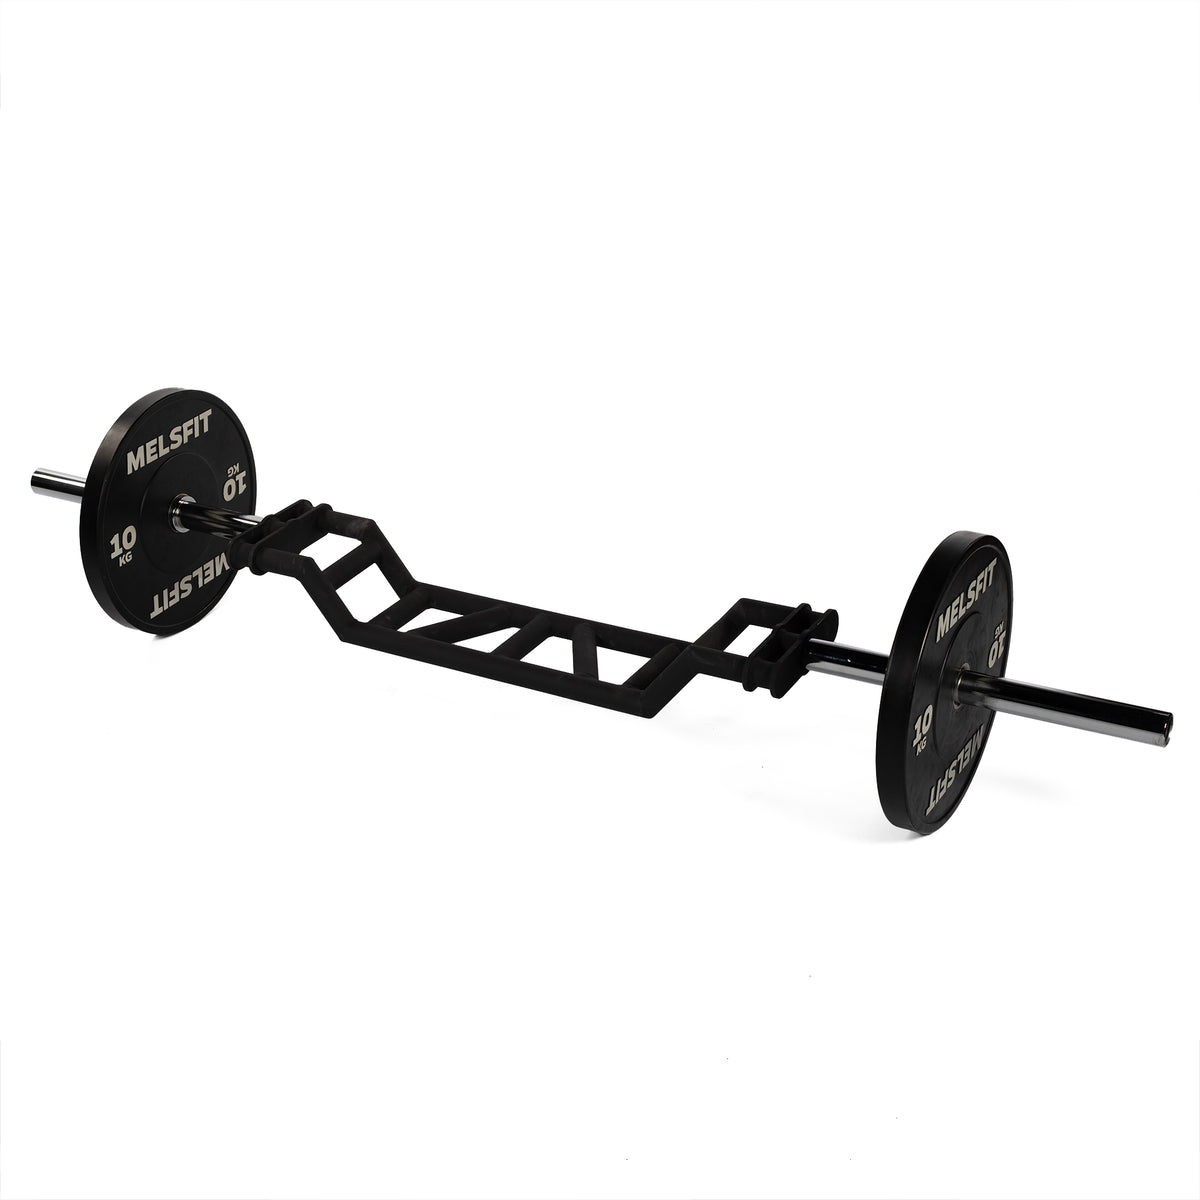 Multi Grip Bar Cambred - Melsfit Performance